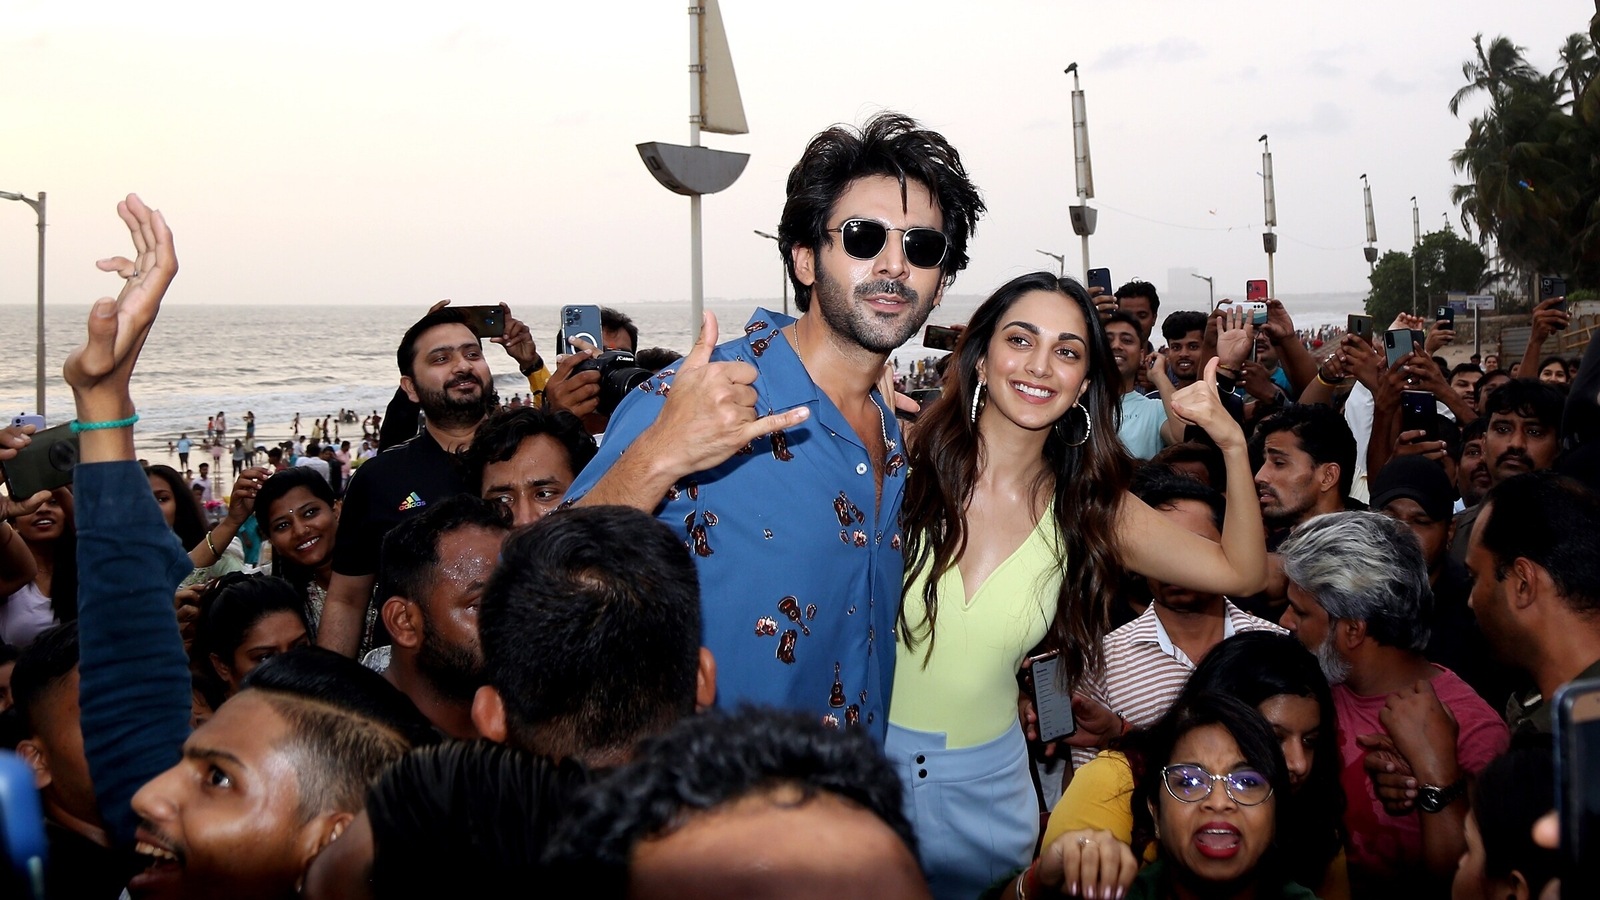 Kiara Advani confesses she tried to steal Kartik Aaryan's fans: ‘He may not notice who is crying for him, I do'